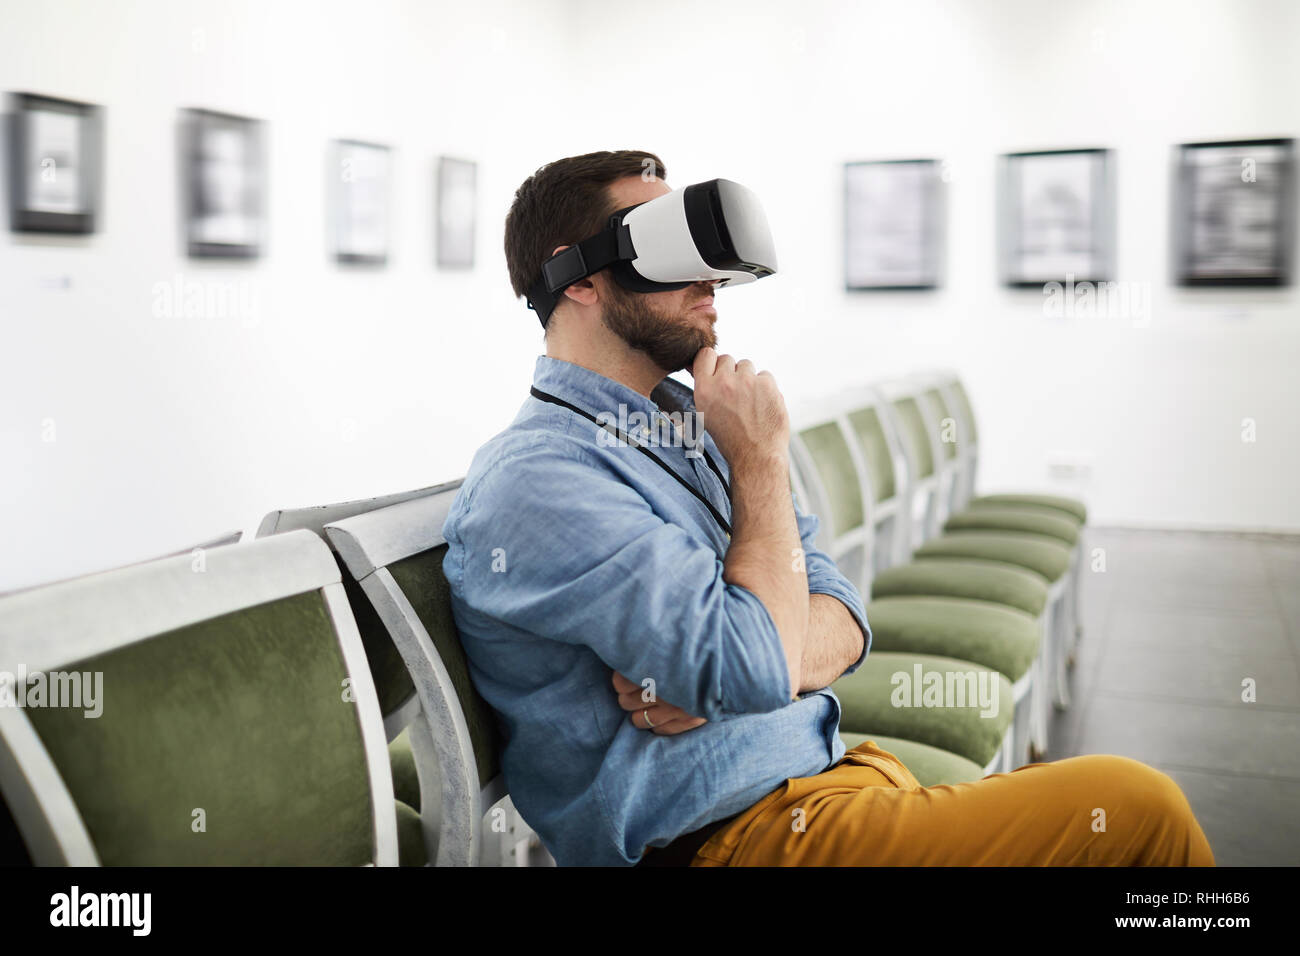 Man Wearing VR in Museum Stock Photo